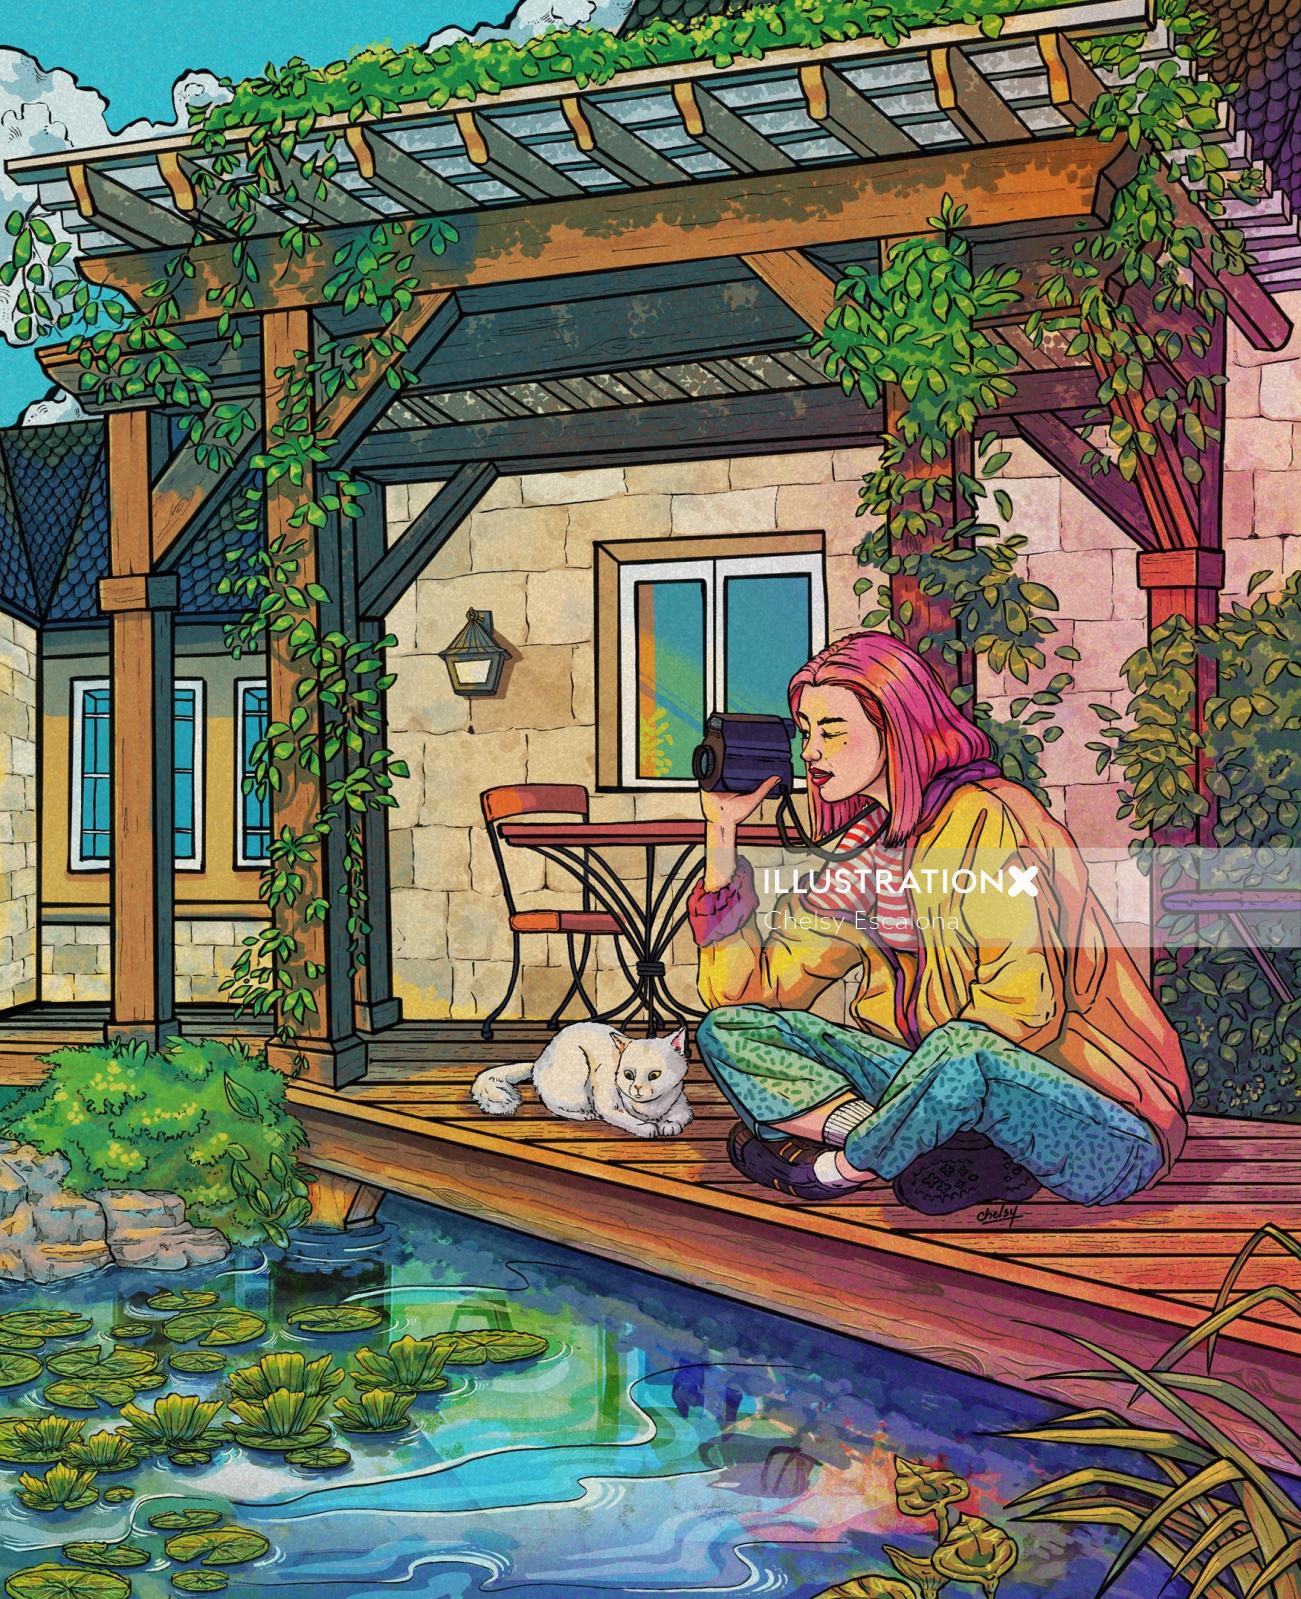 Lakeside cottage as shown in pop art